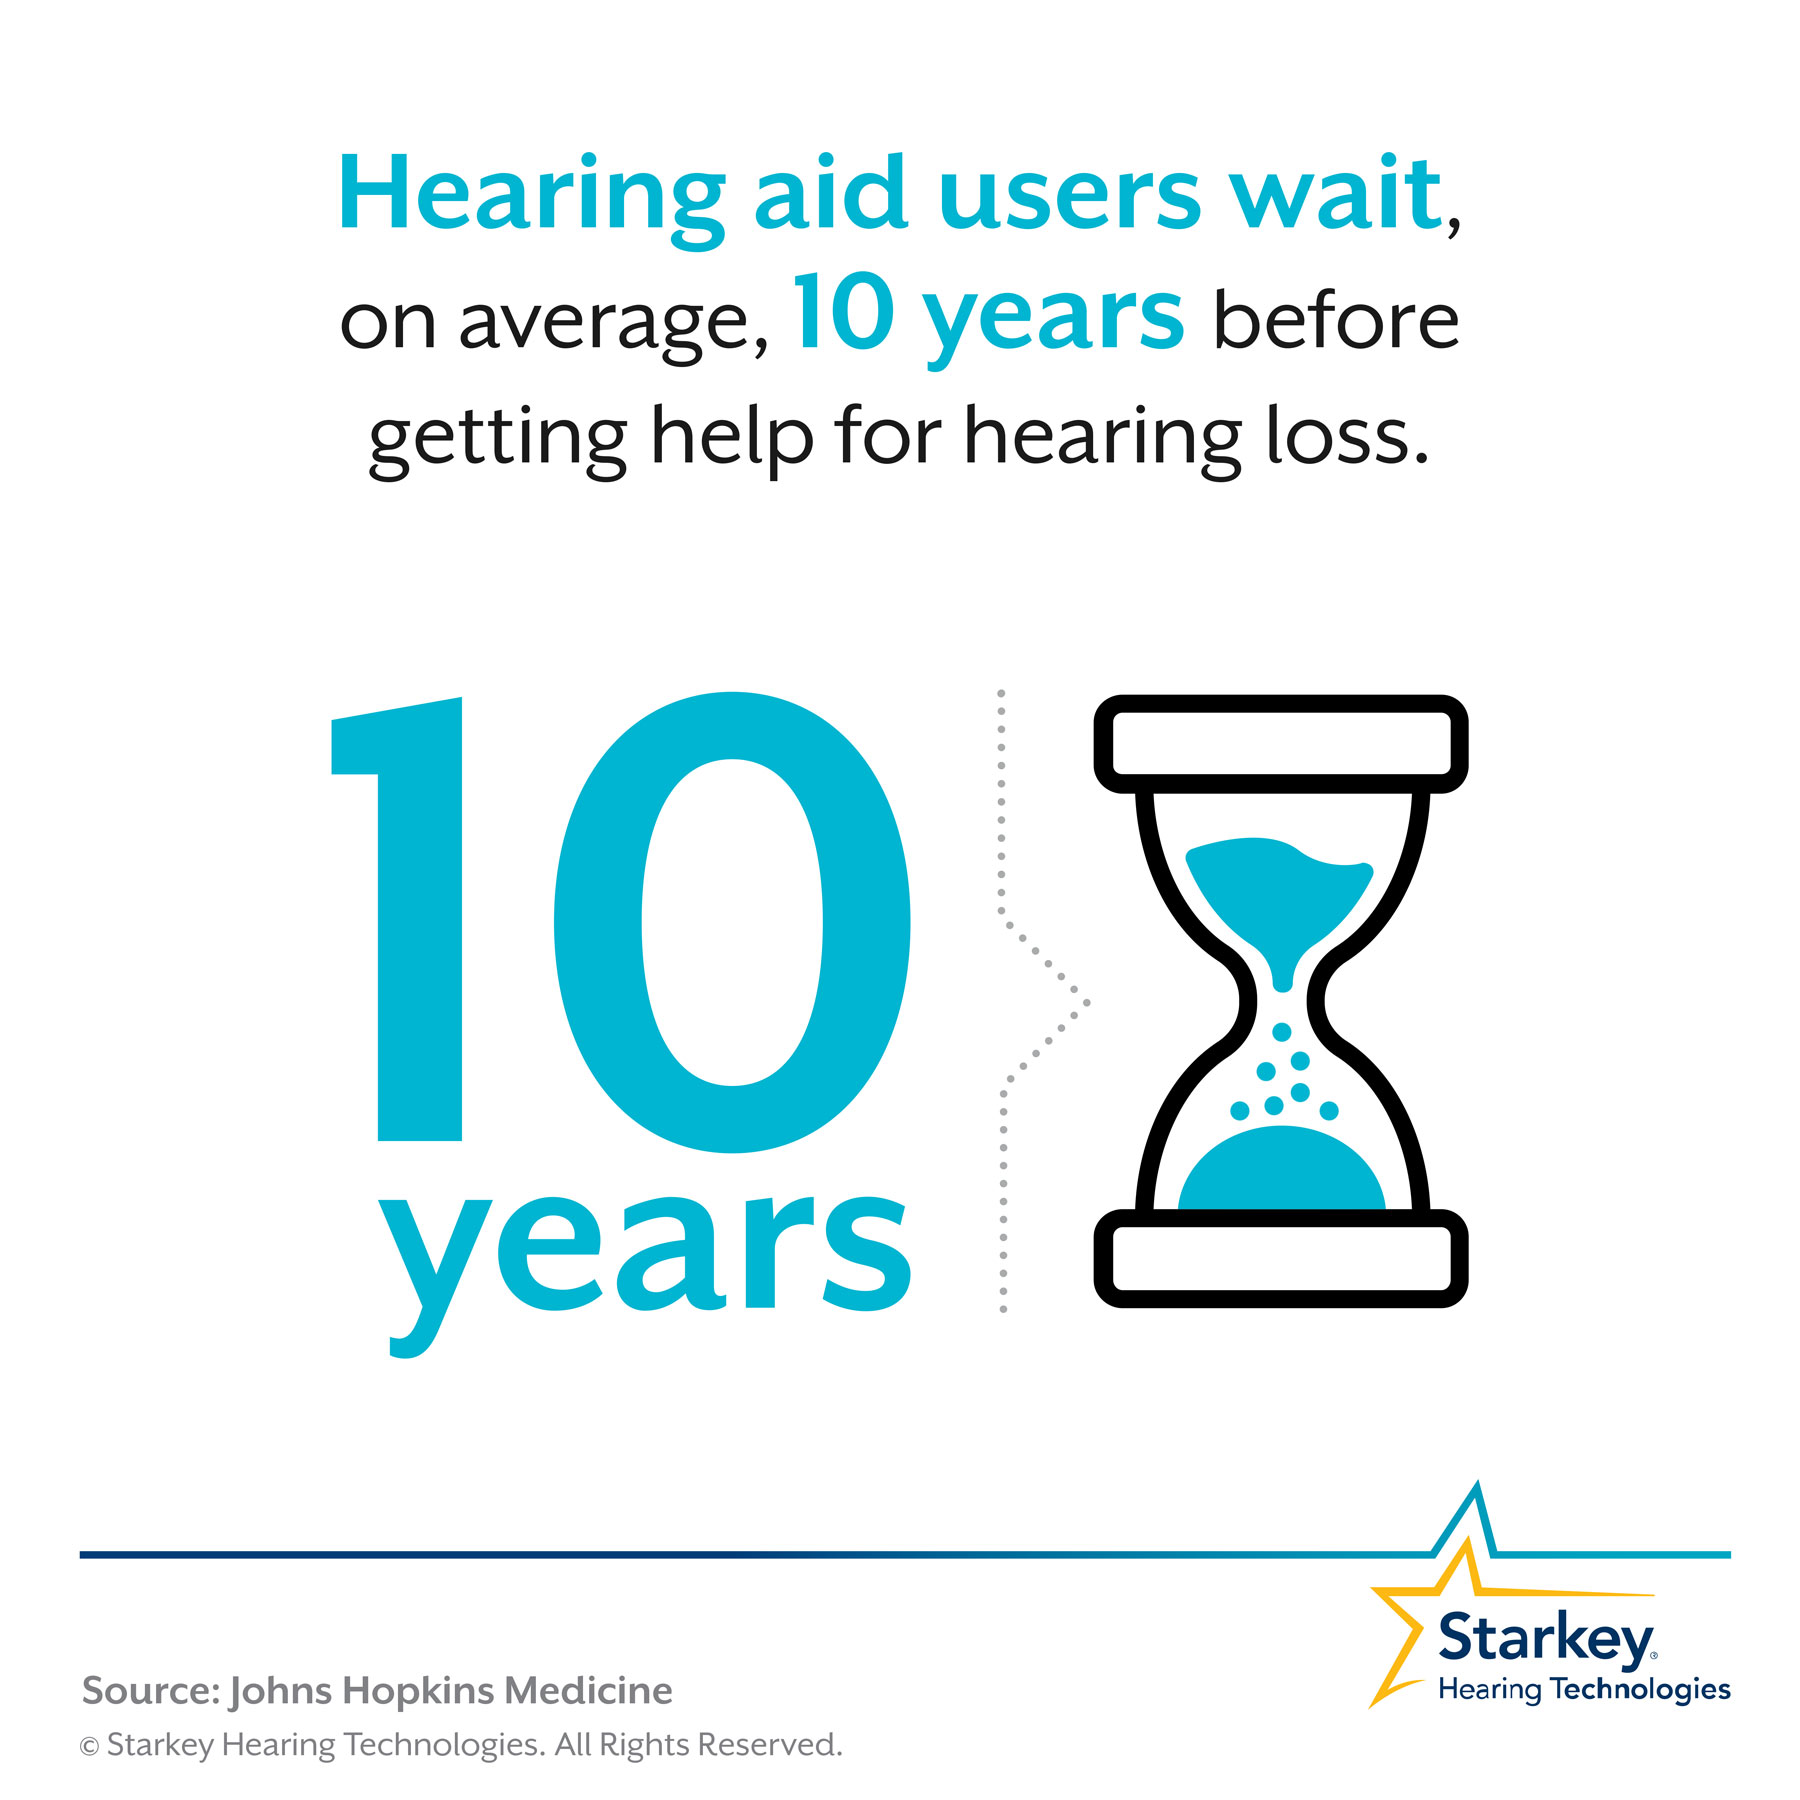 People, on average, wait about 10 years before seeking treatment for hearing loss. 